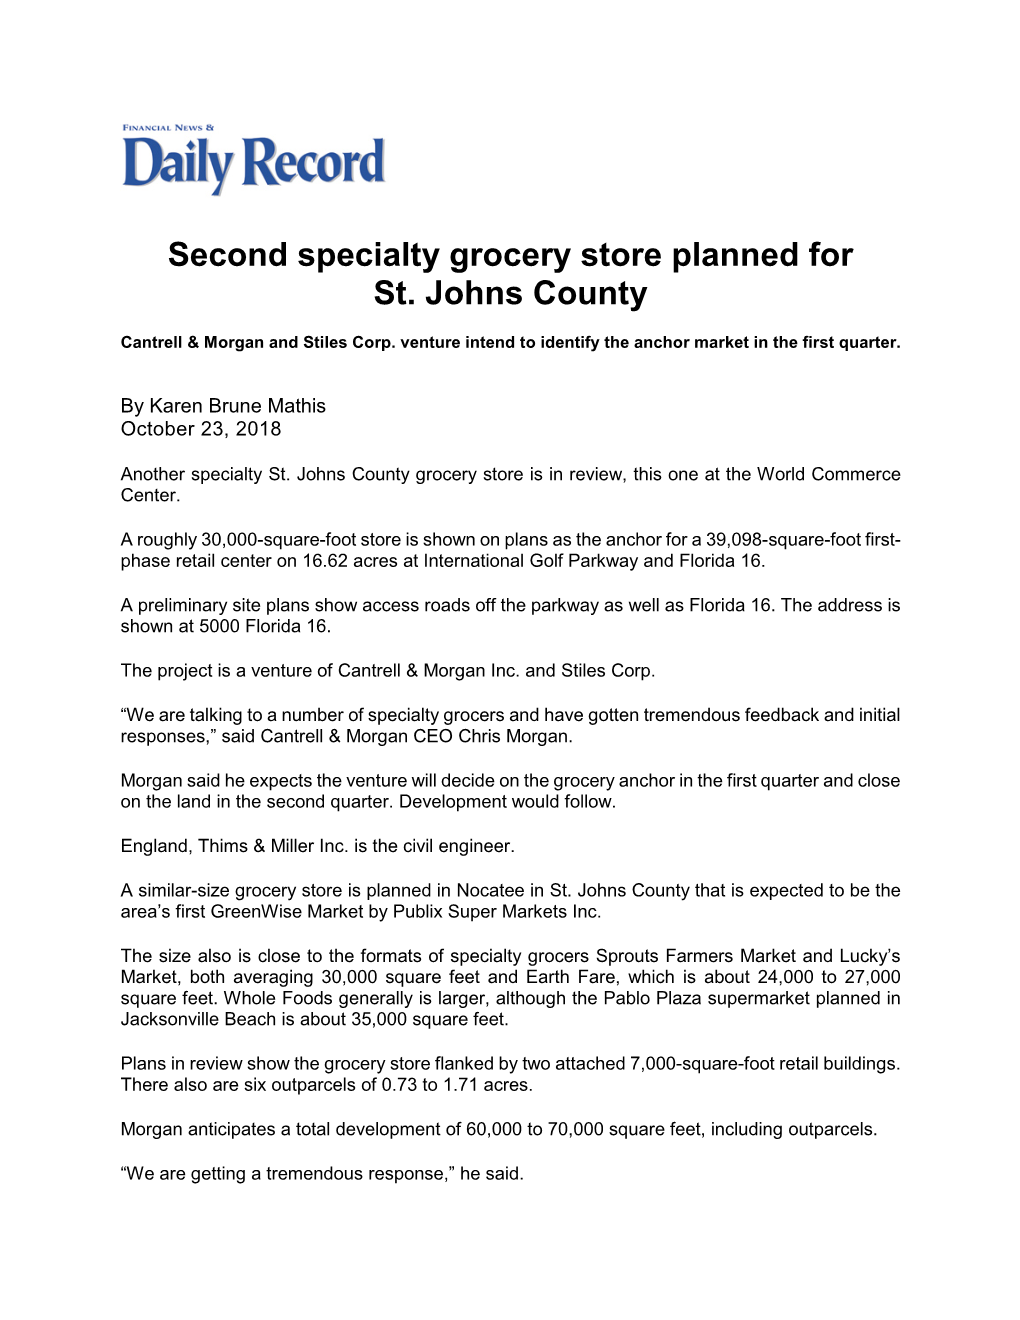 Second Specialty Grocer Planned For